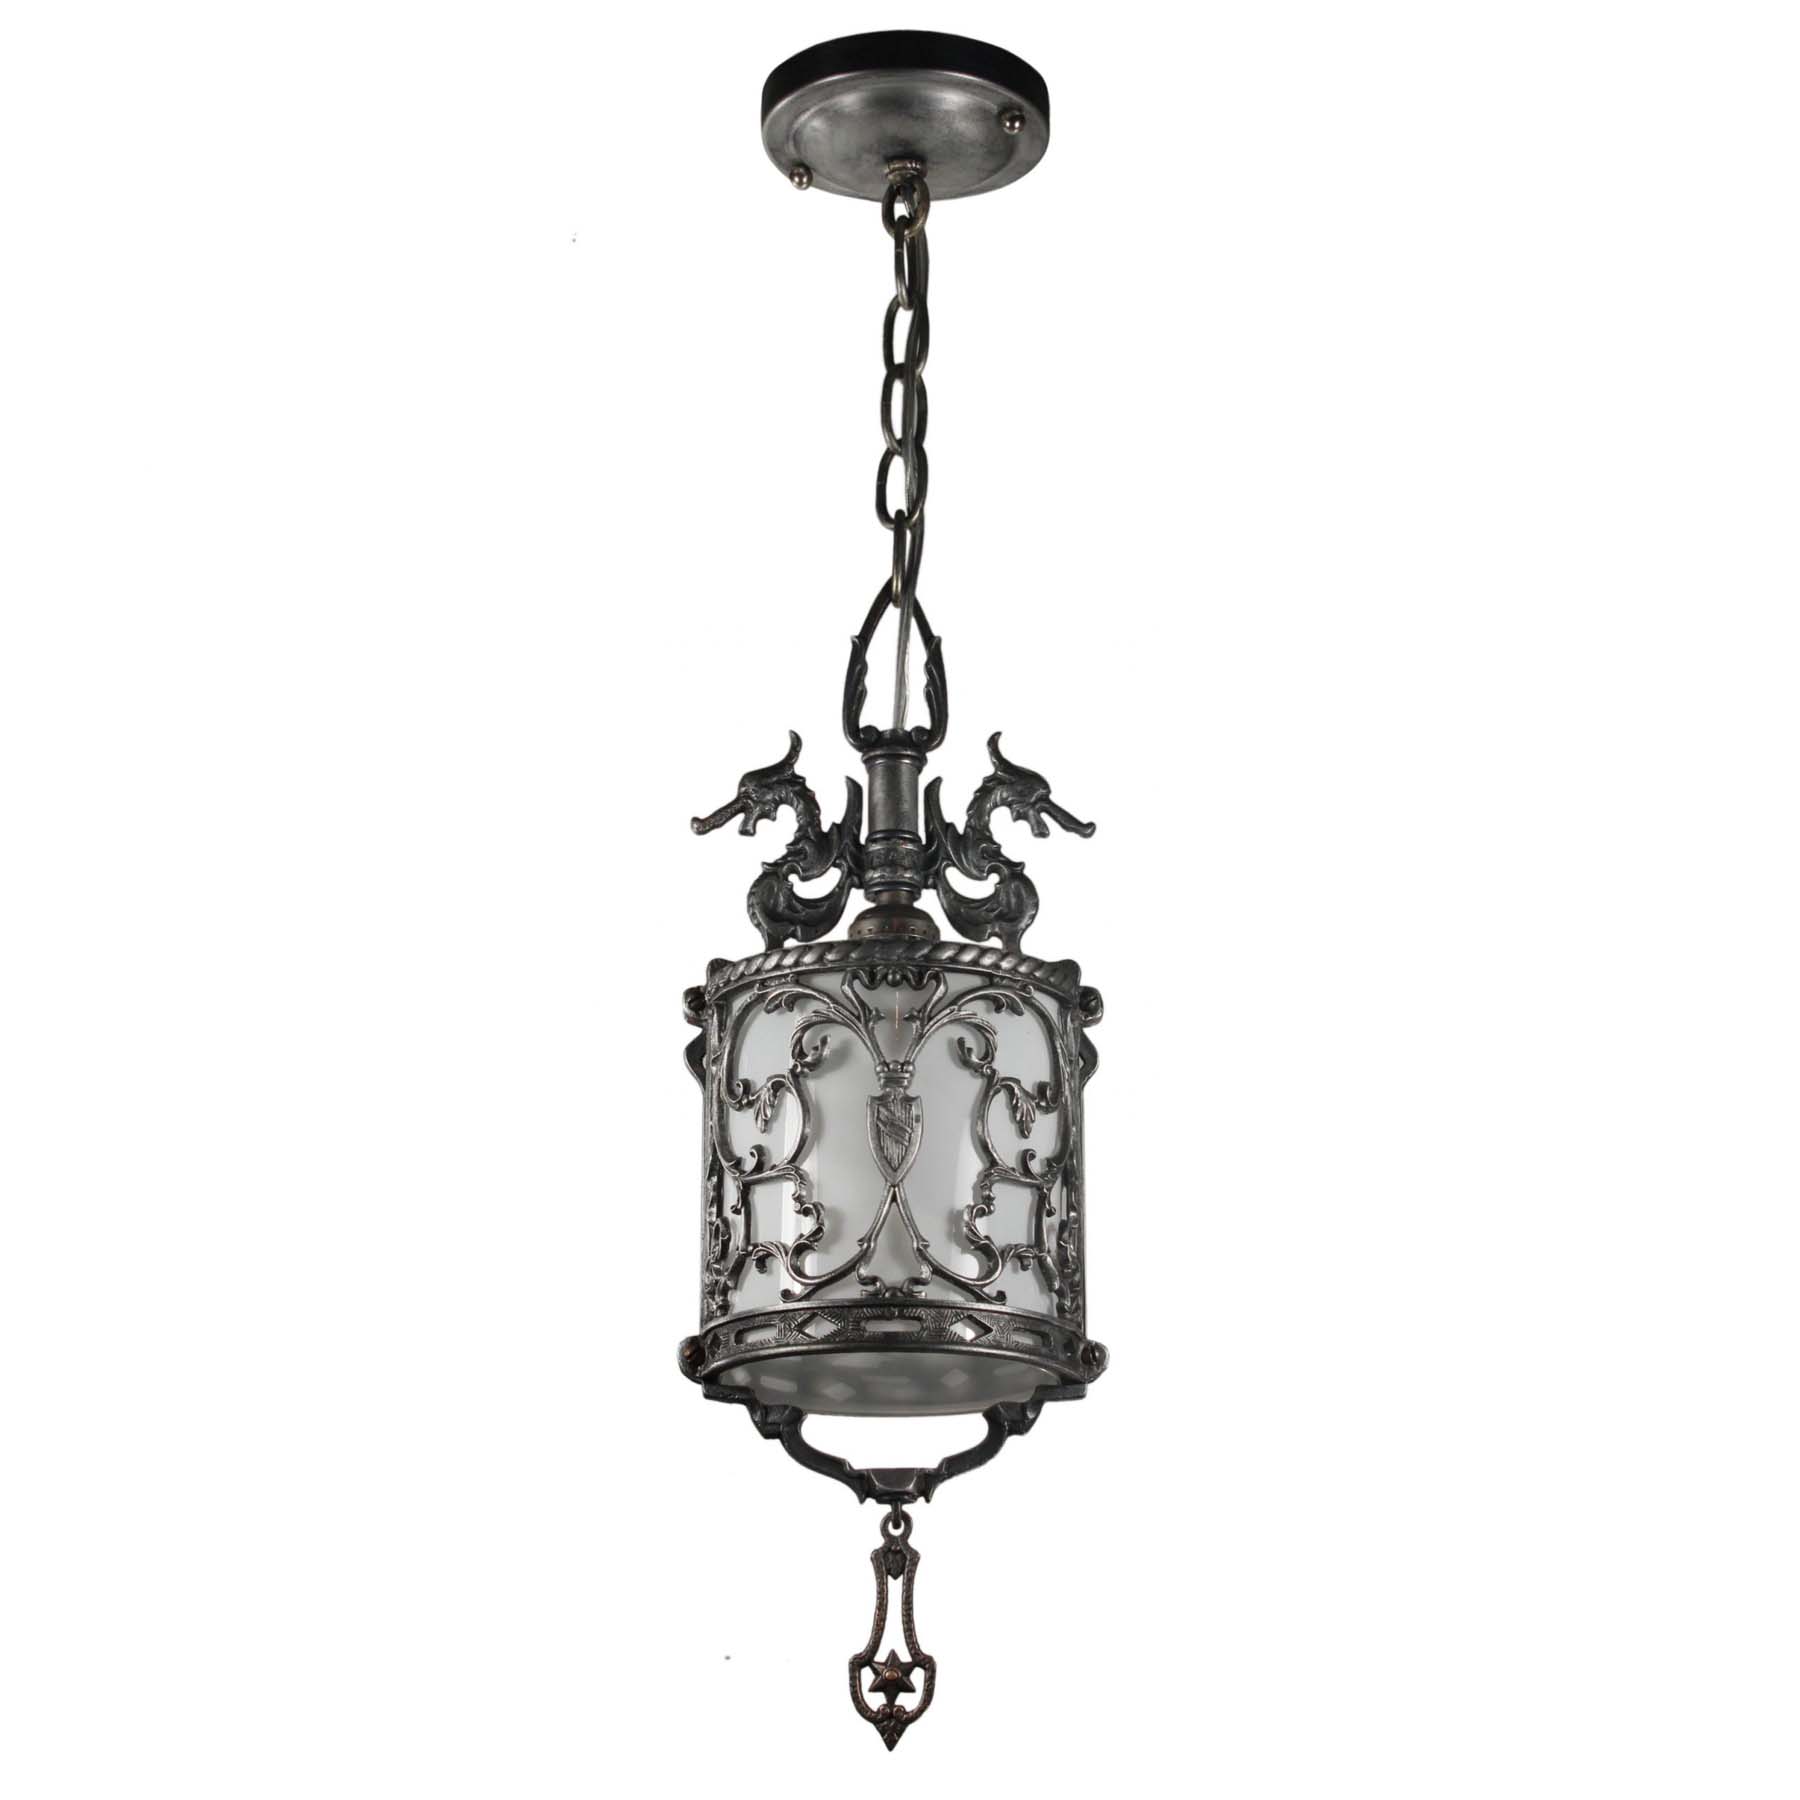 SOLD Unusual Antique Figural Pendant Light with Shields & Dragons-67386